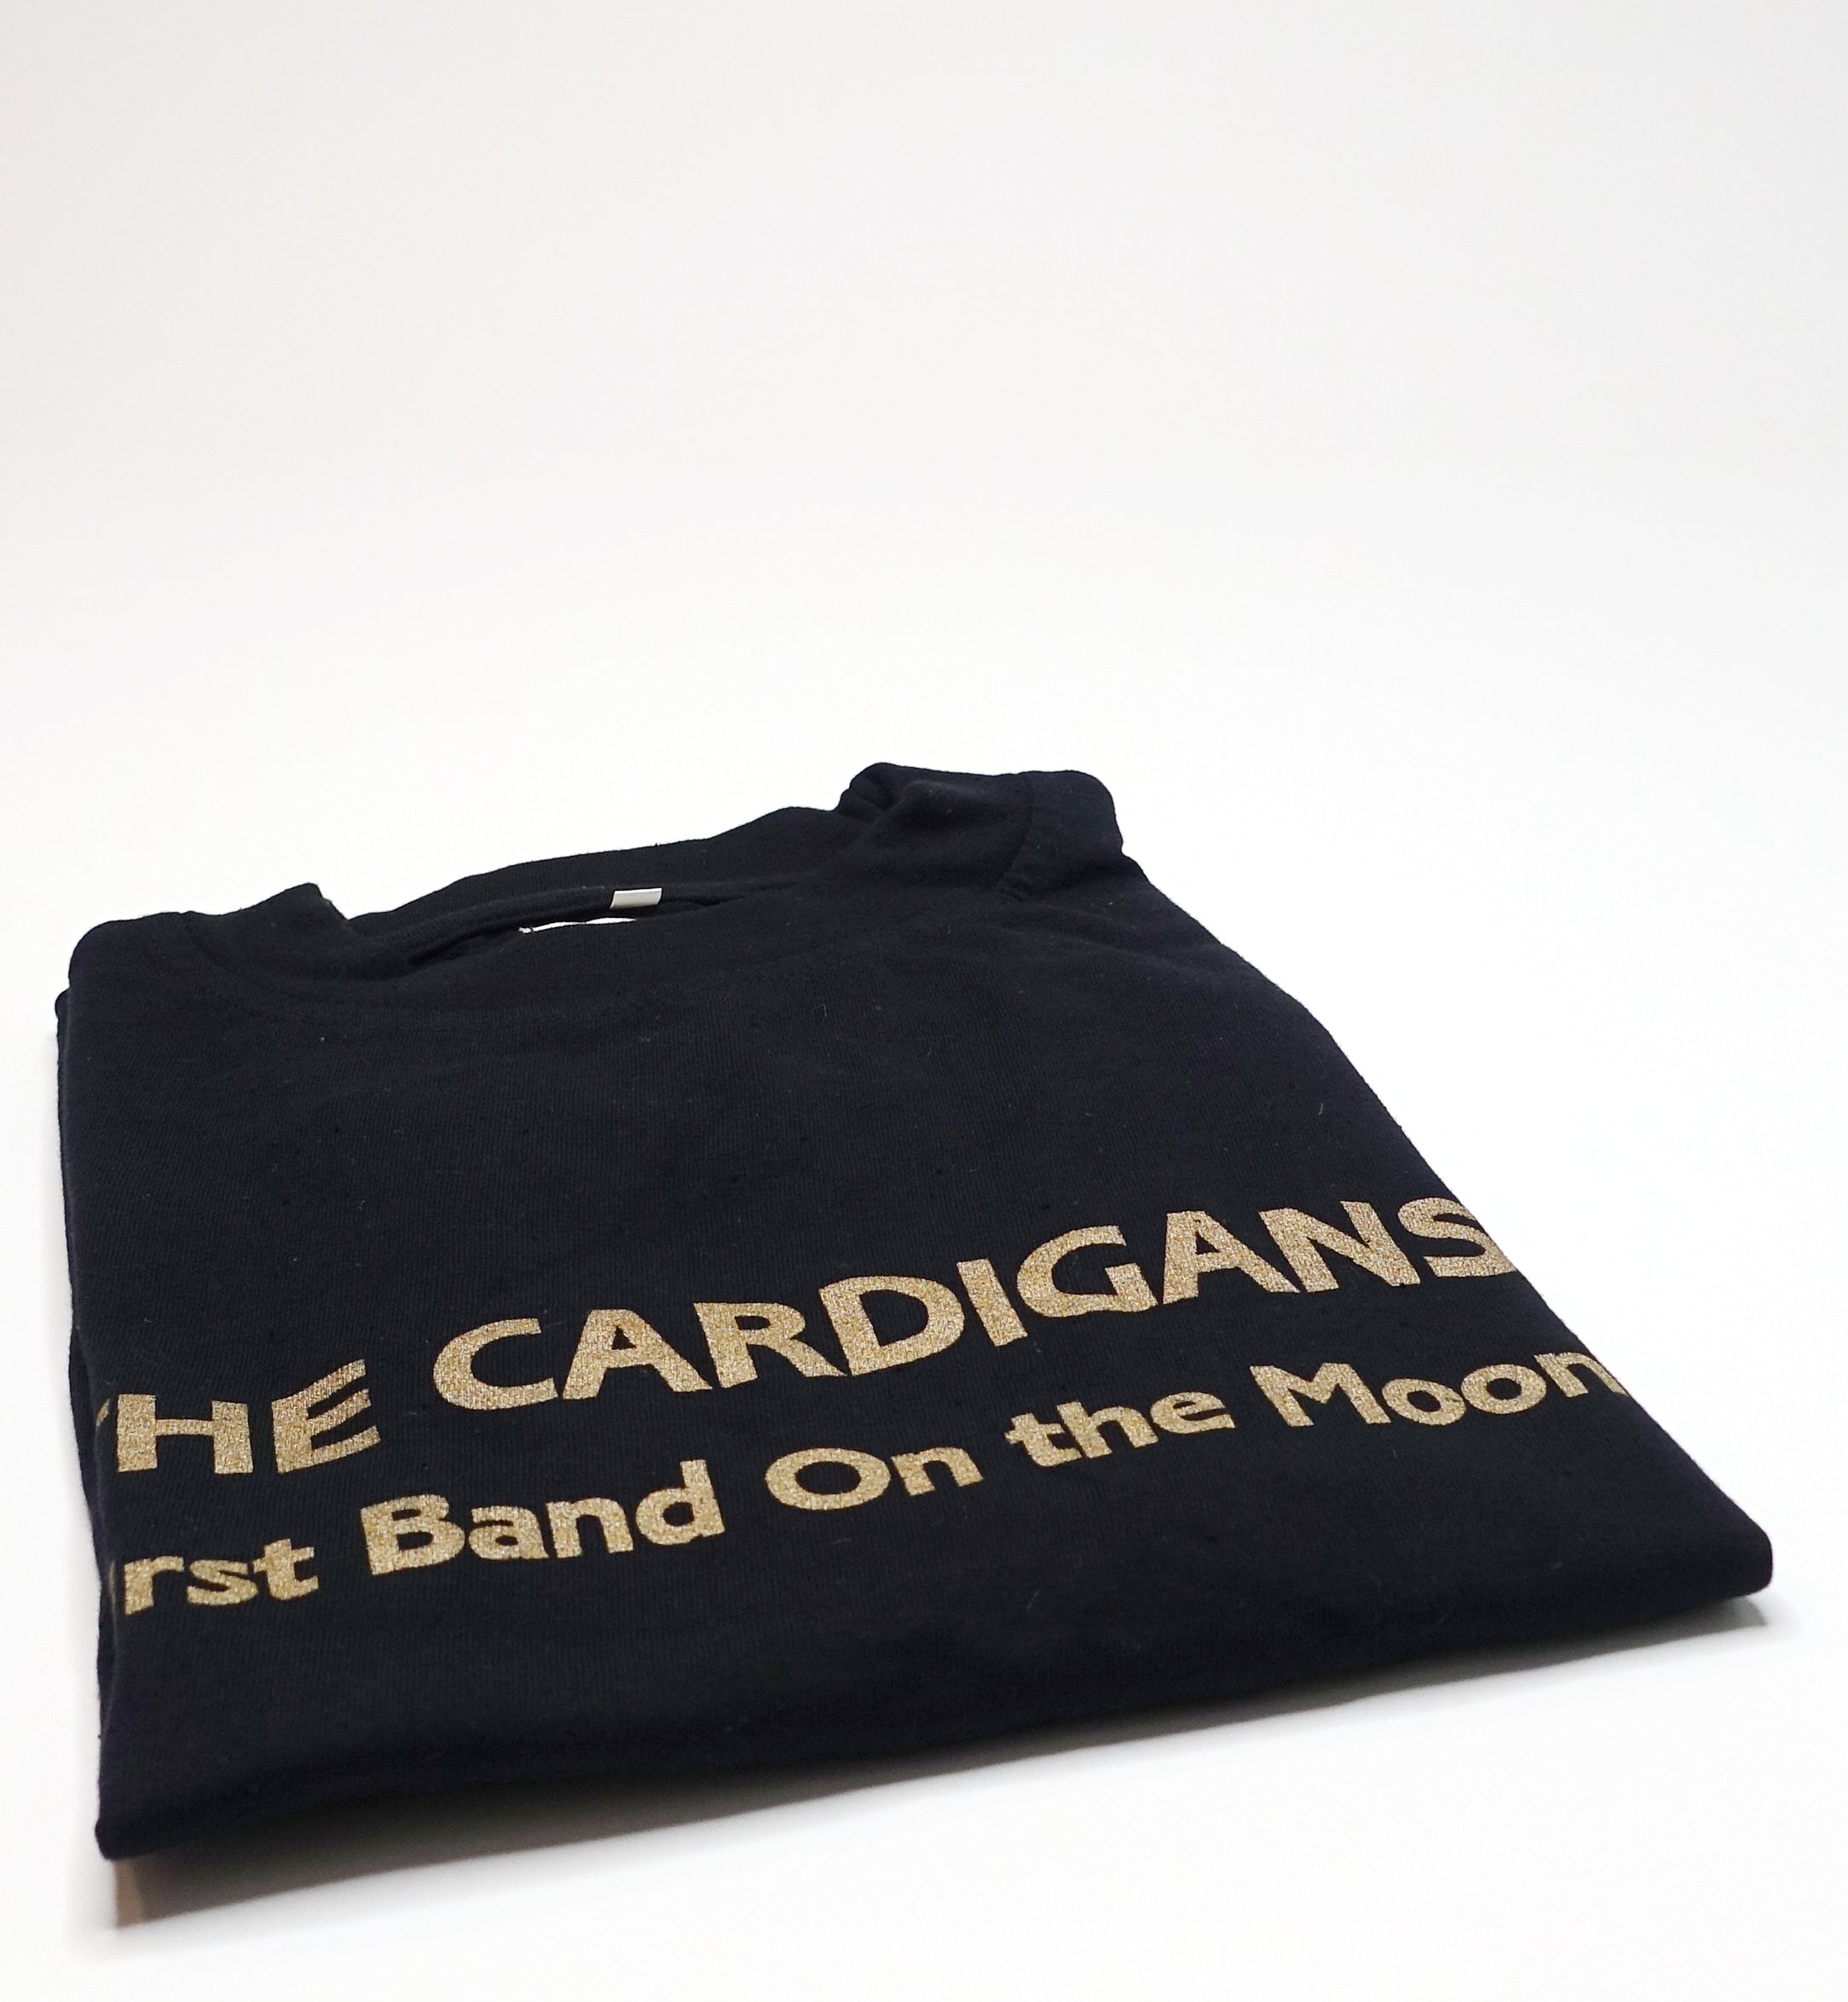 the Cardigans - First Band on The Moon 1993 Box w/ Poster & Shirt Size XL